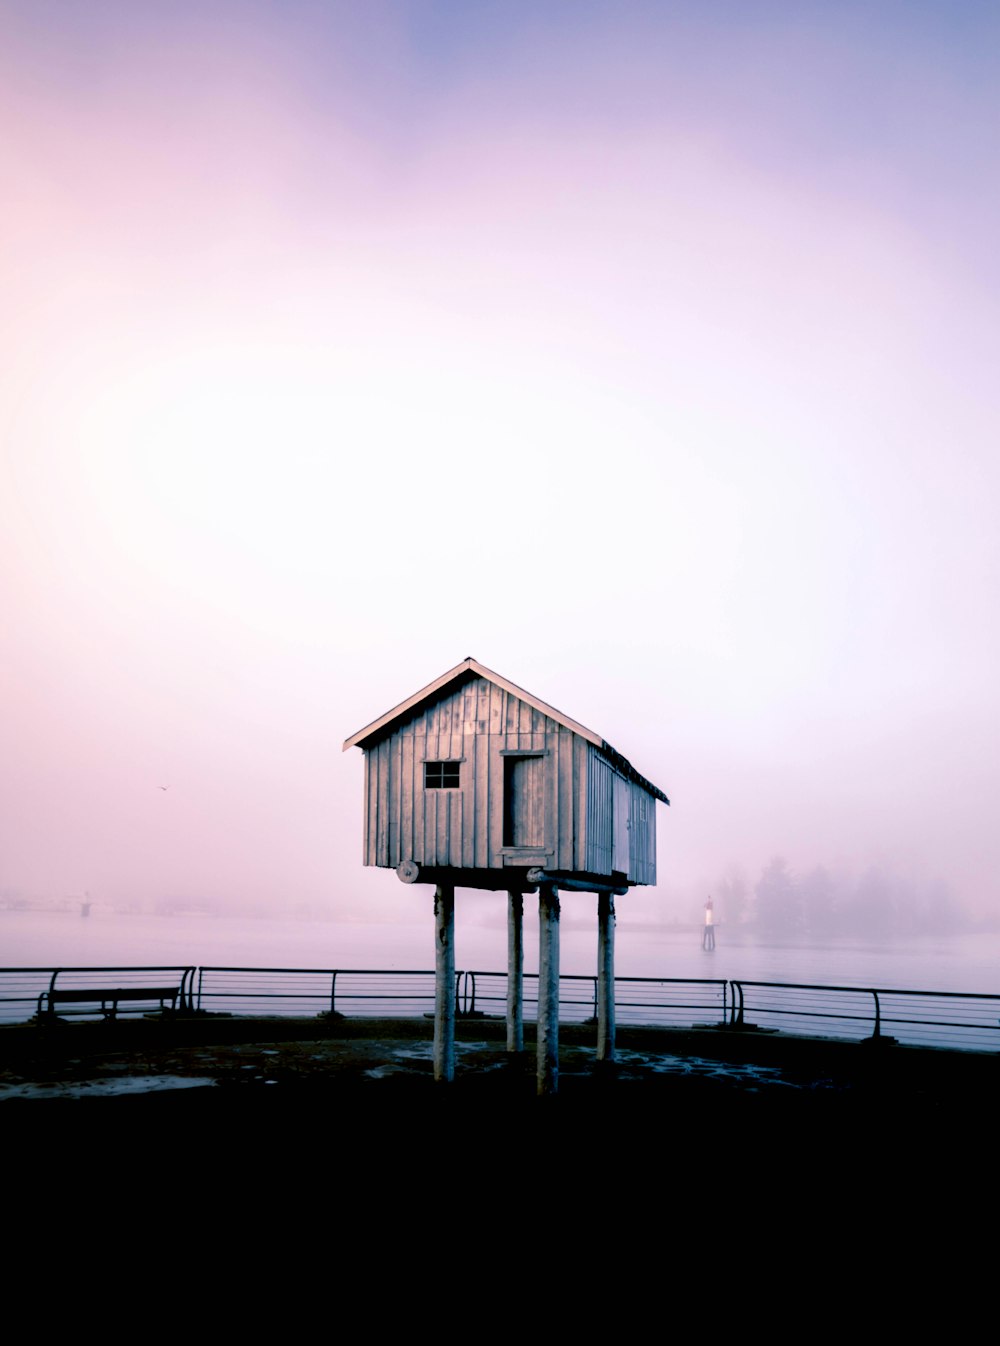 gray wooden storage shed under gray sky